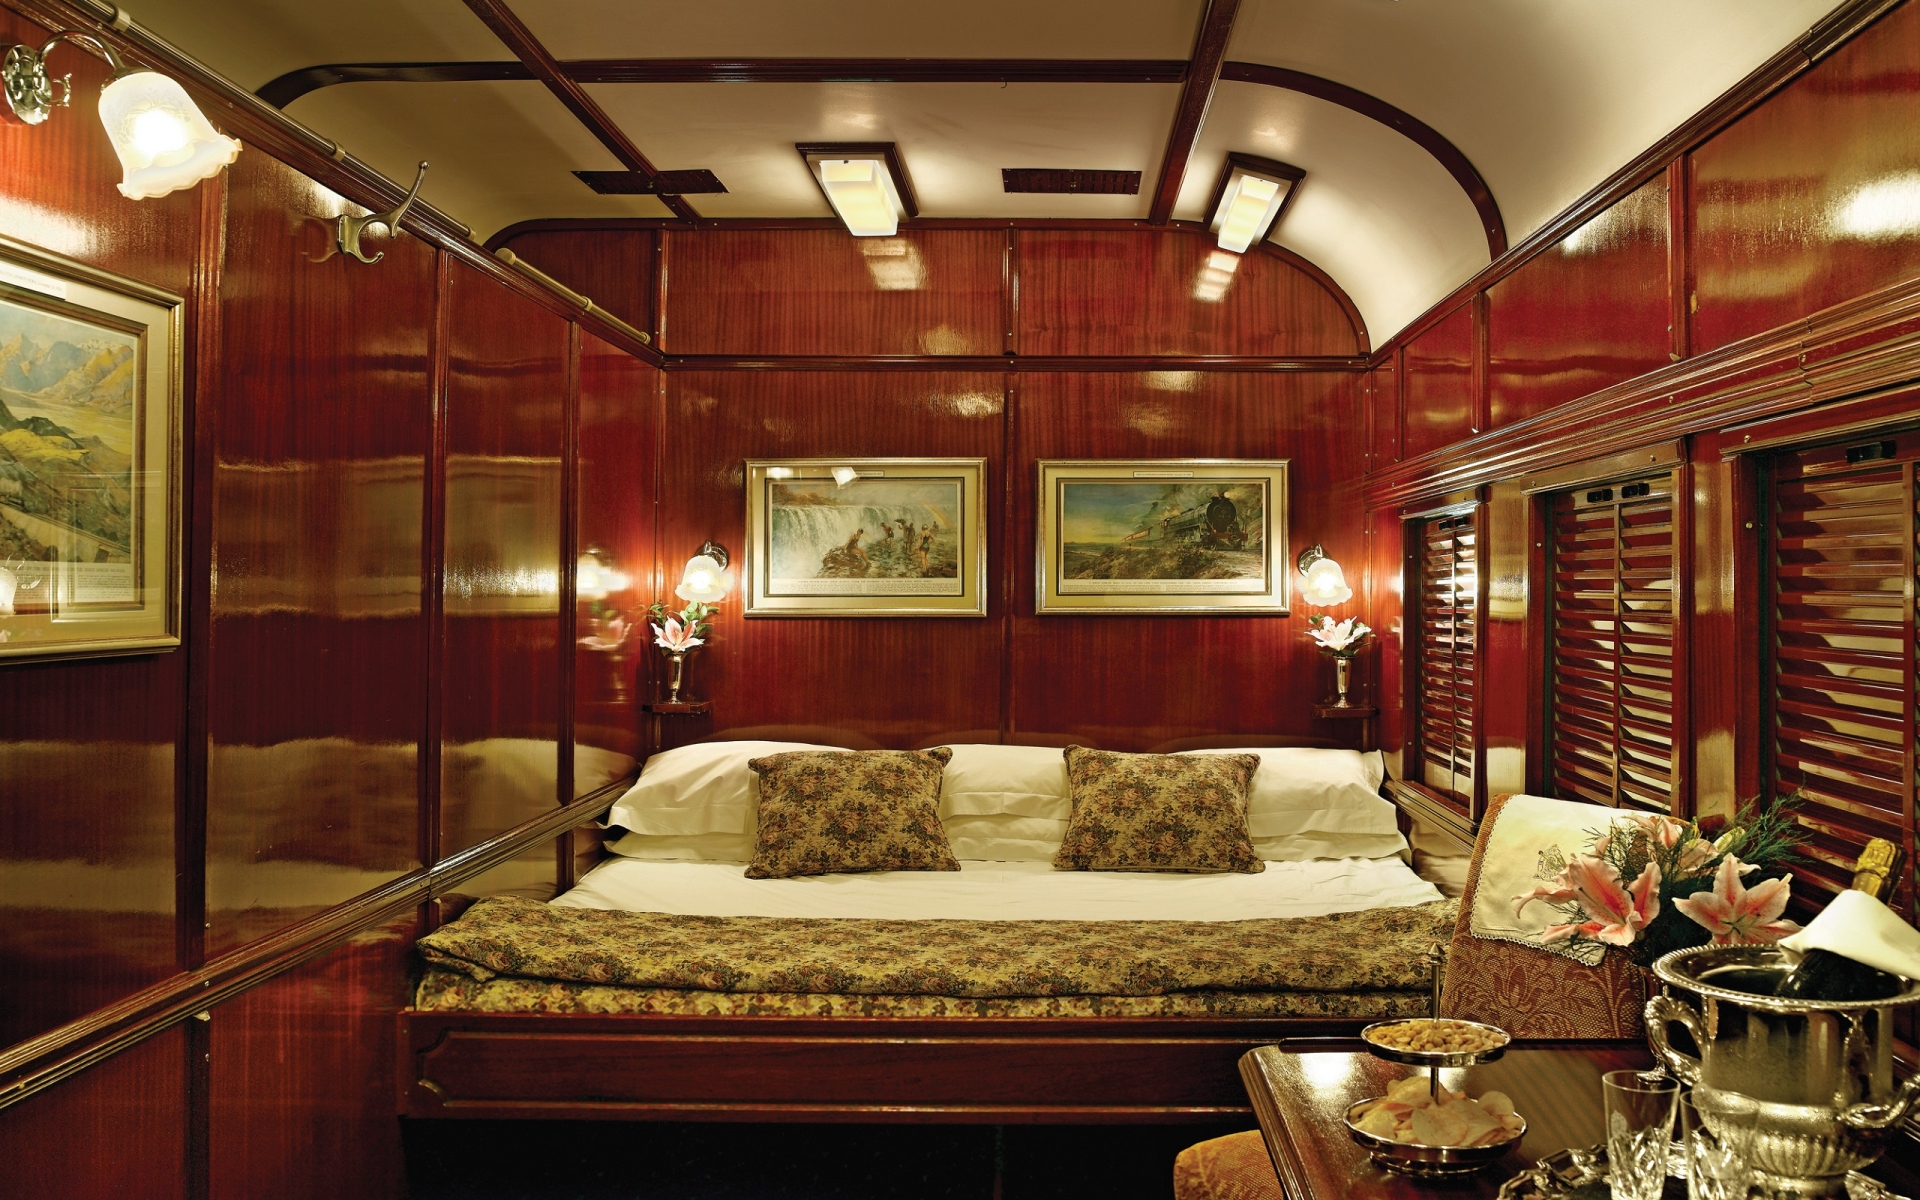 Rovos Rail Trains Offer All The Same Amenities as a 5-Star Hotel